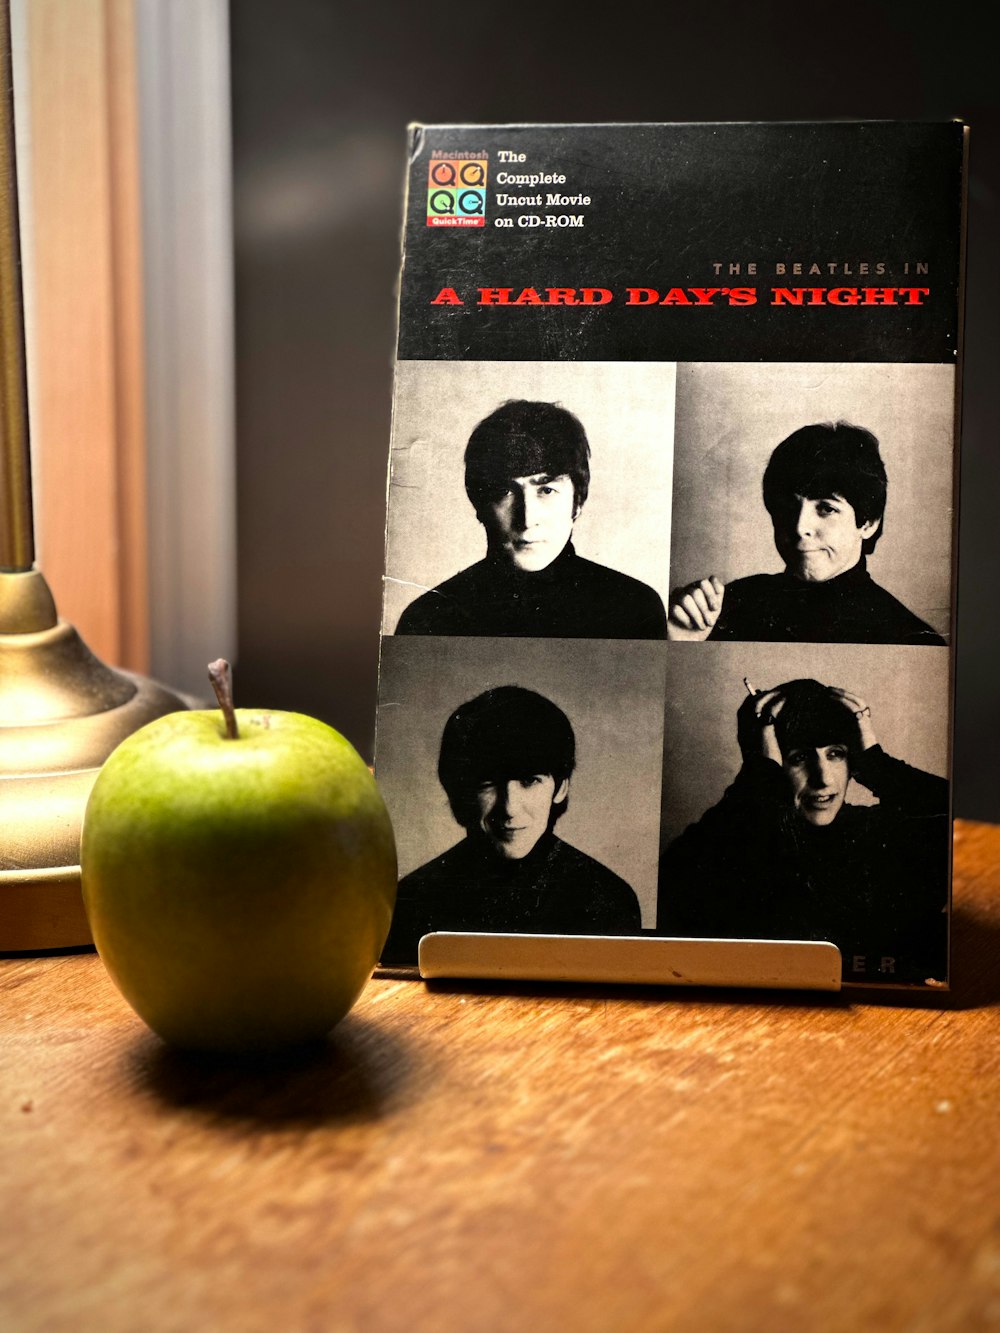 a green apple sitting next to a book on a table